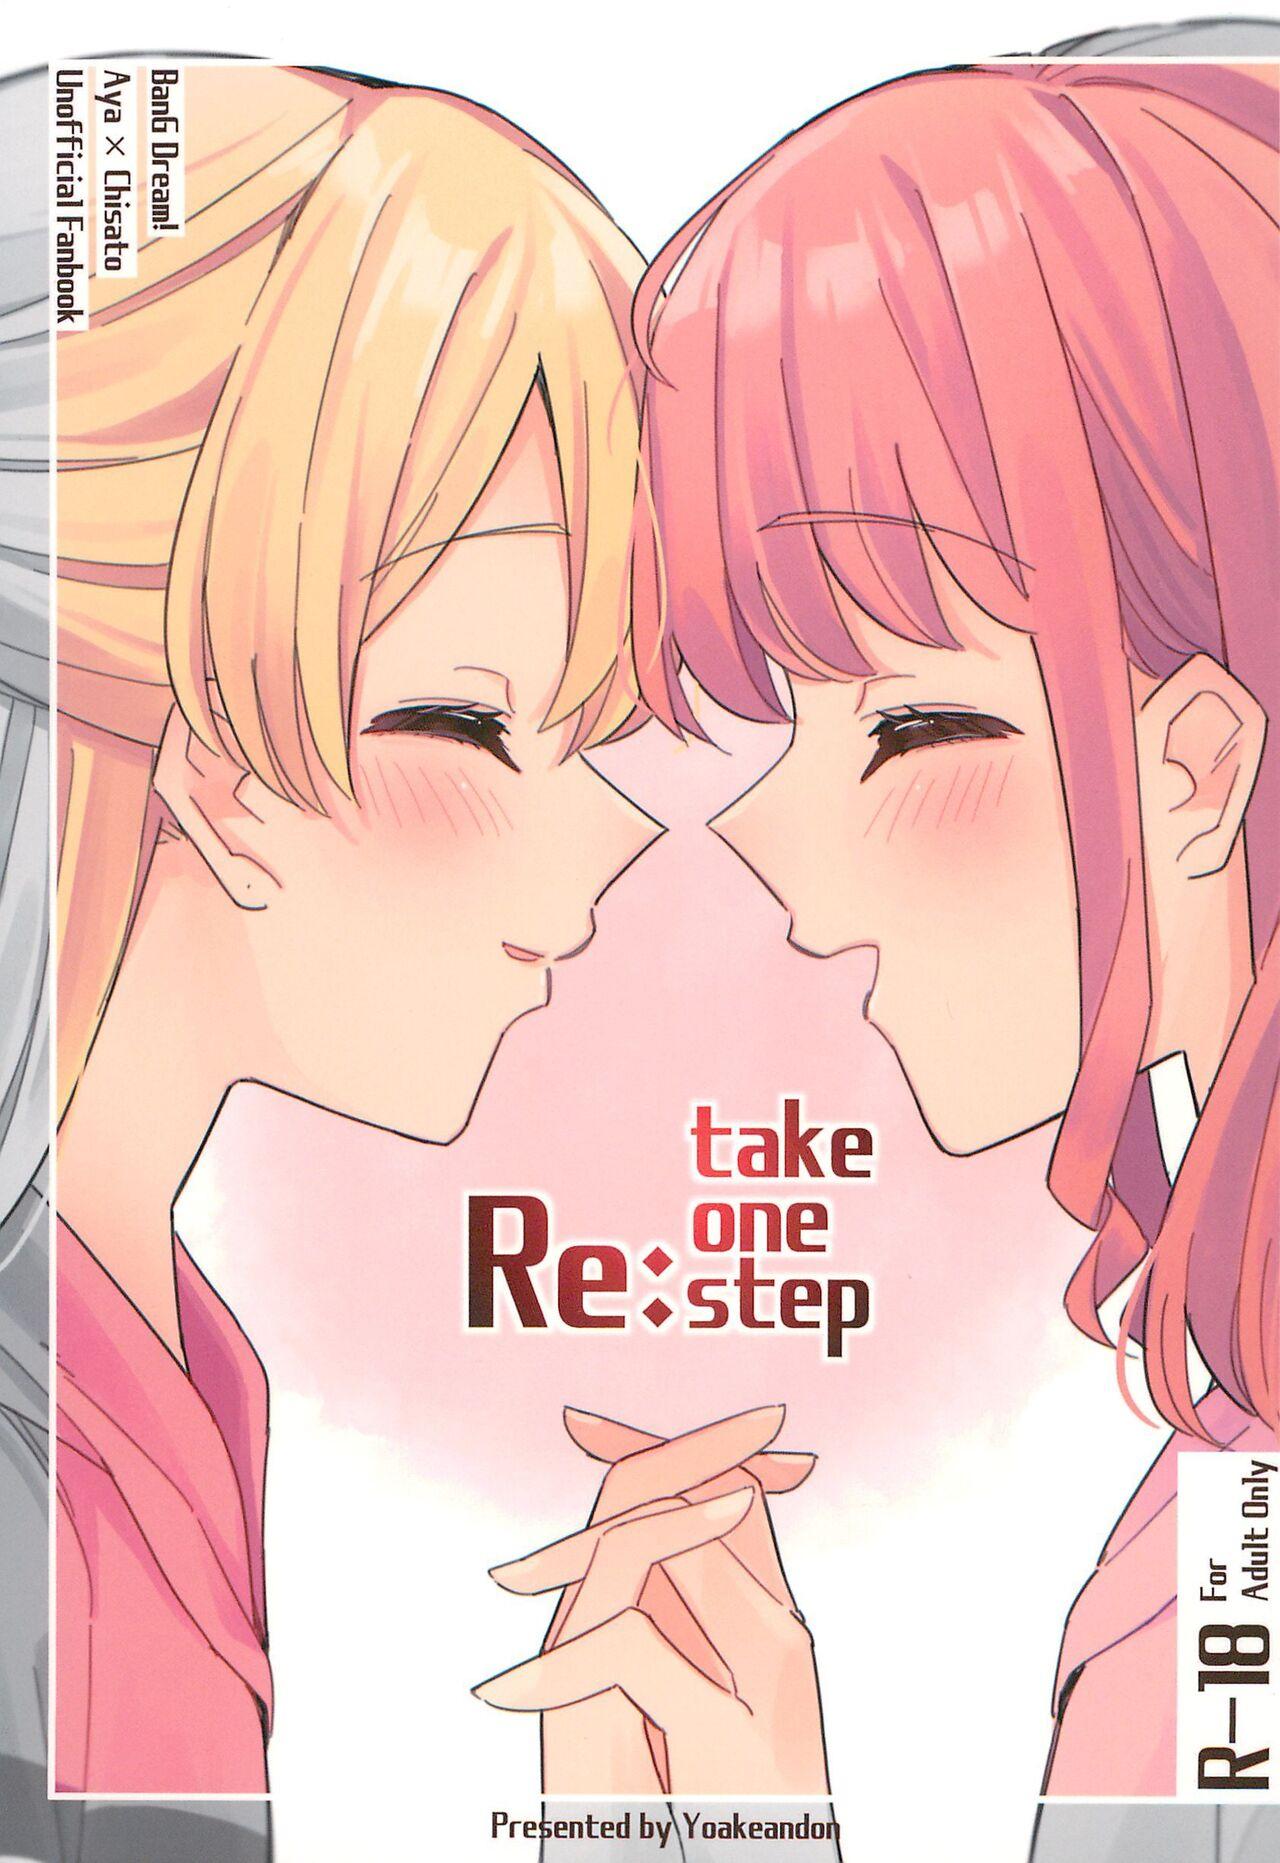 Re:take one step (CIRCLE Space Meeting 5th) [ヨアケ行燈 (かうちぽてと)] (BanG Dream!) 0